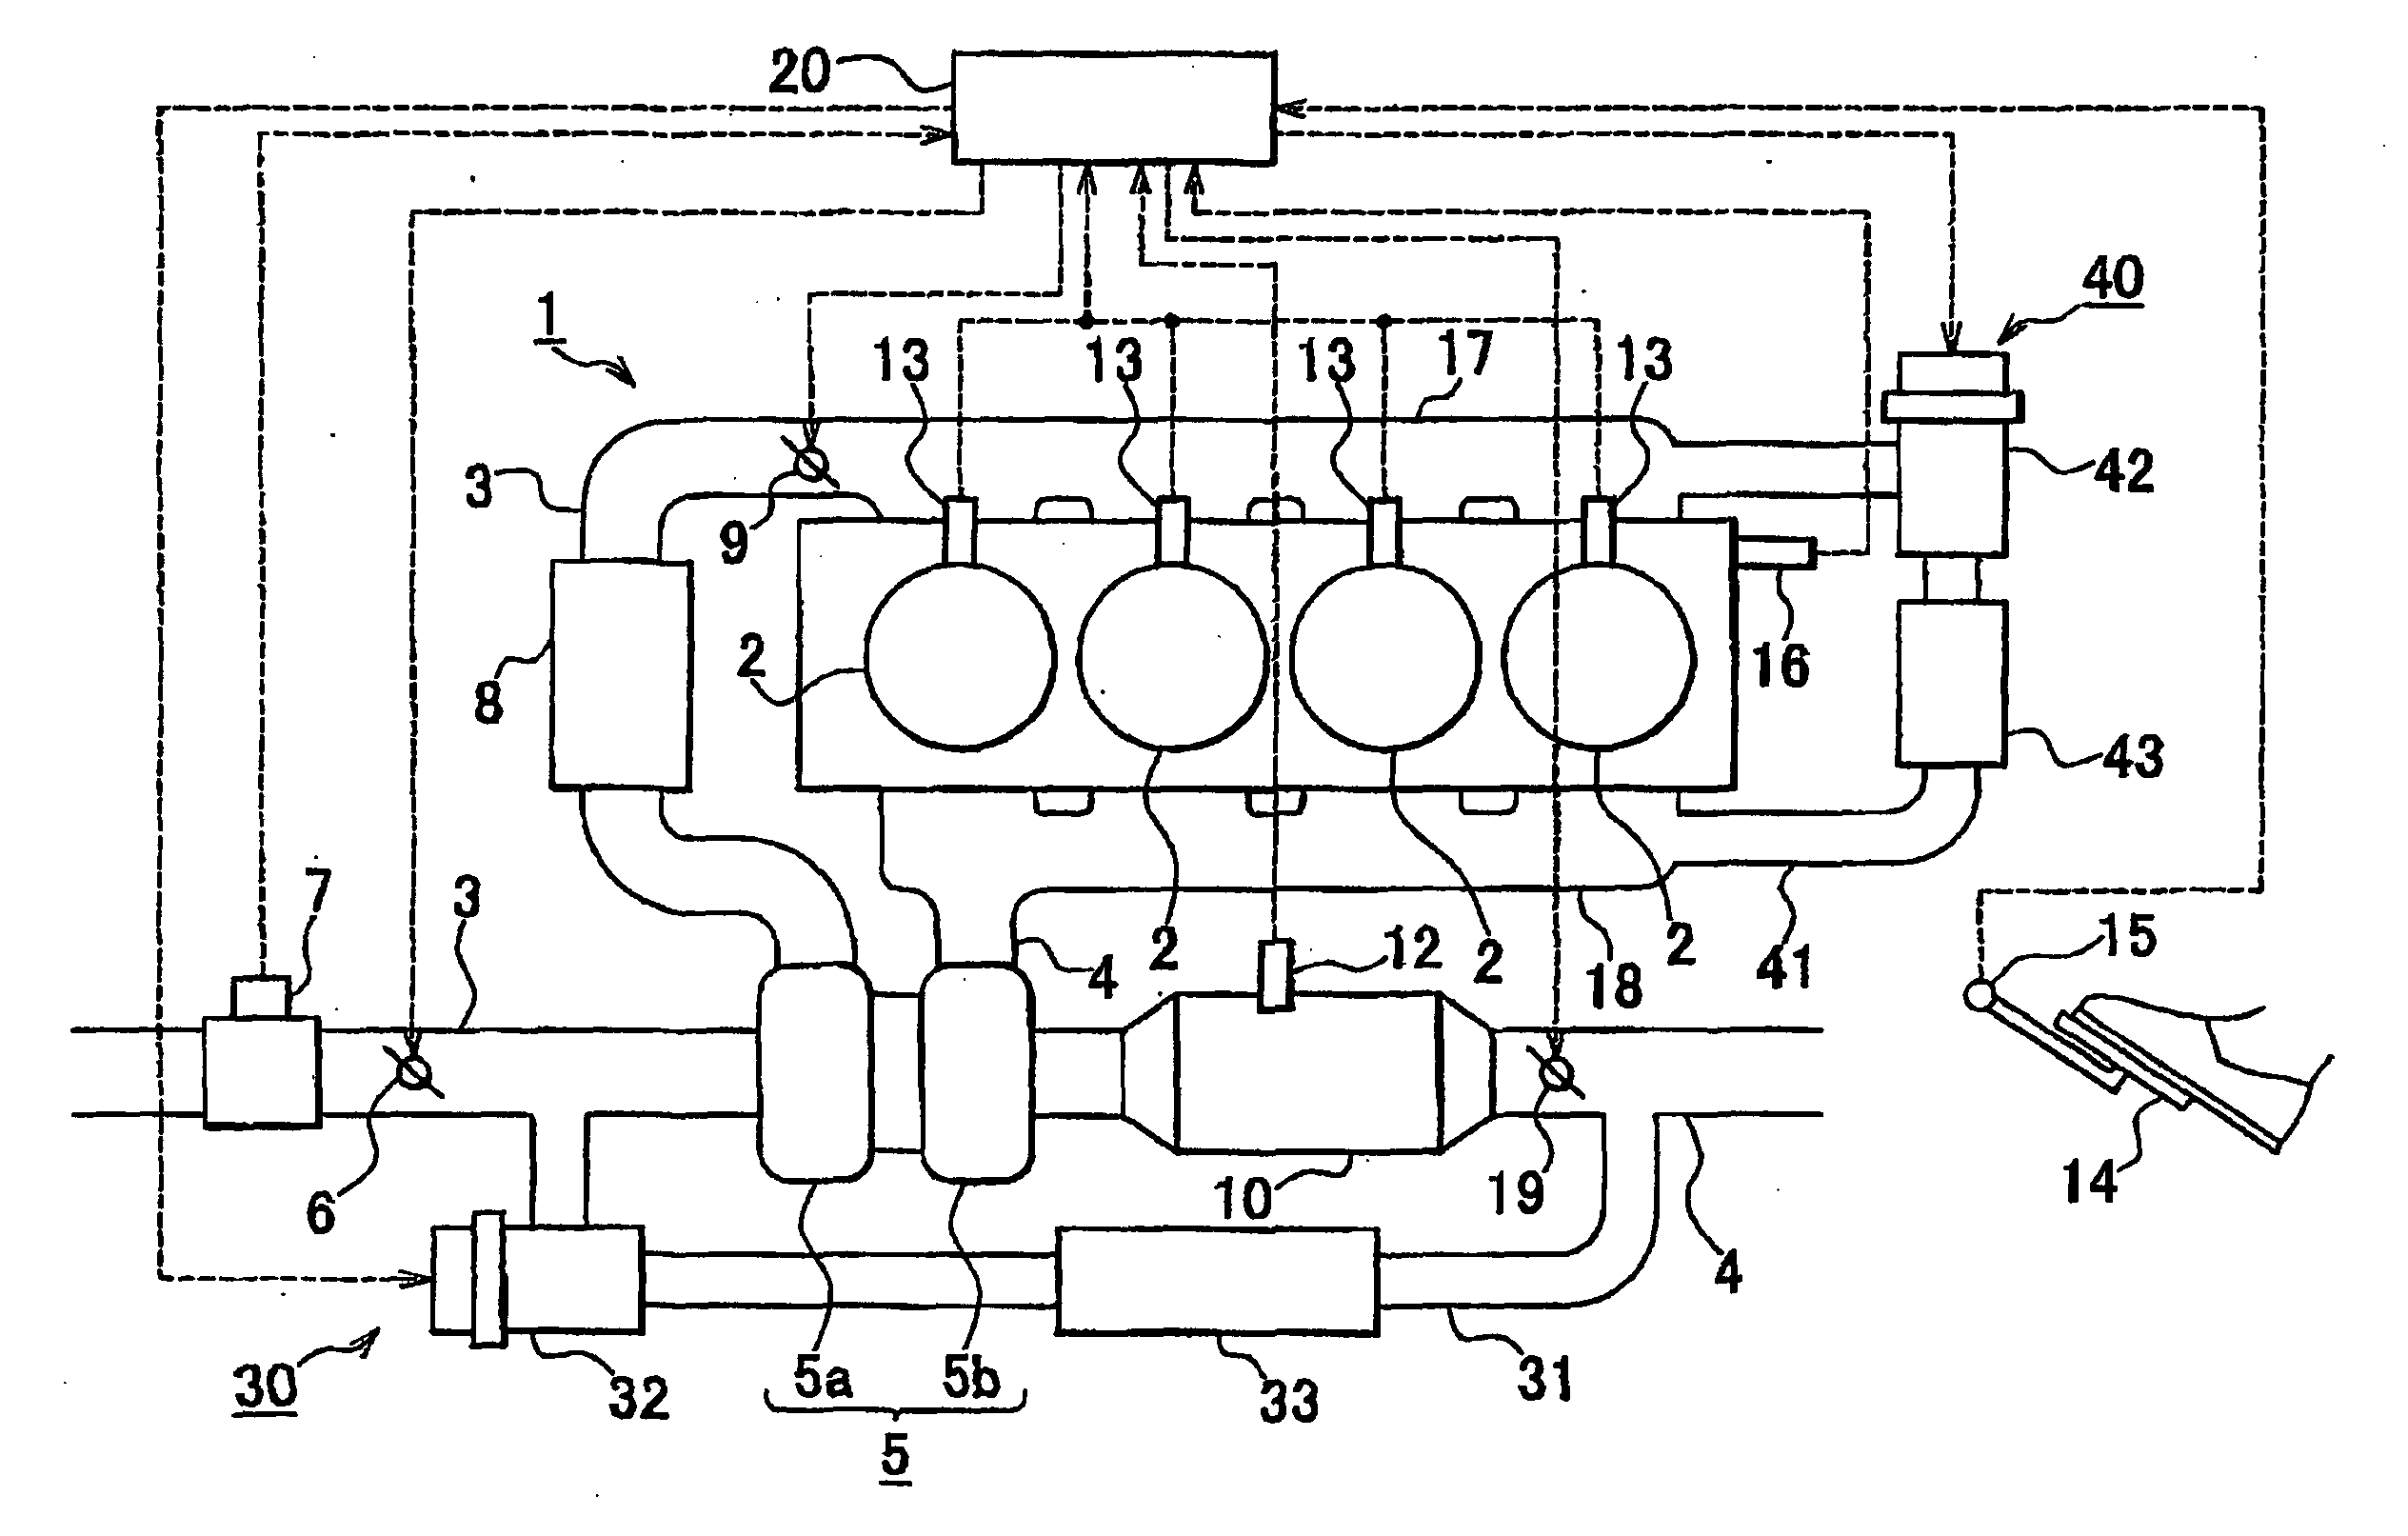 Egr system for internal combustion engine and method for controlling the same